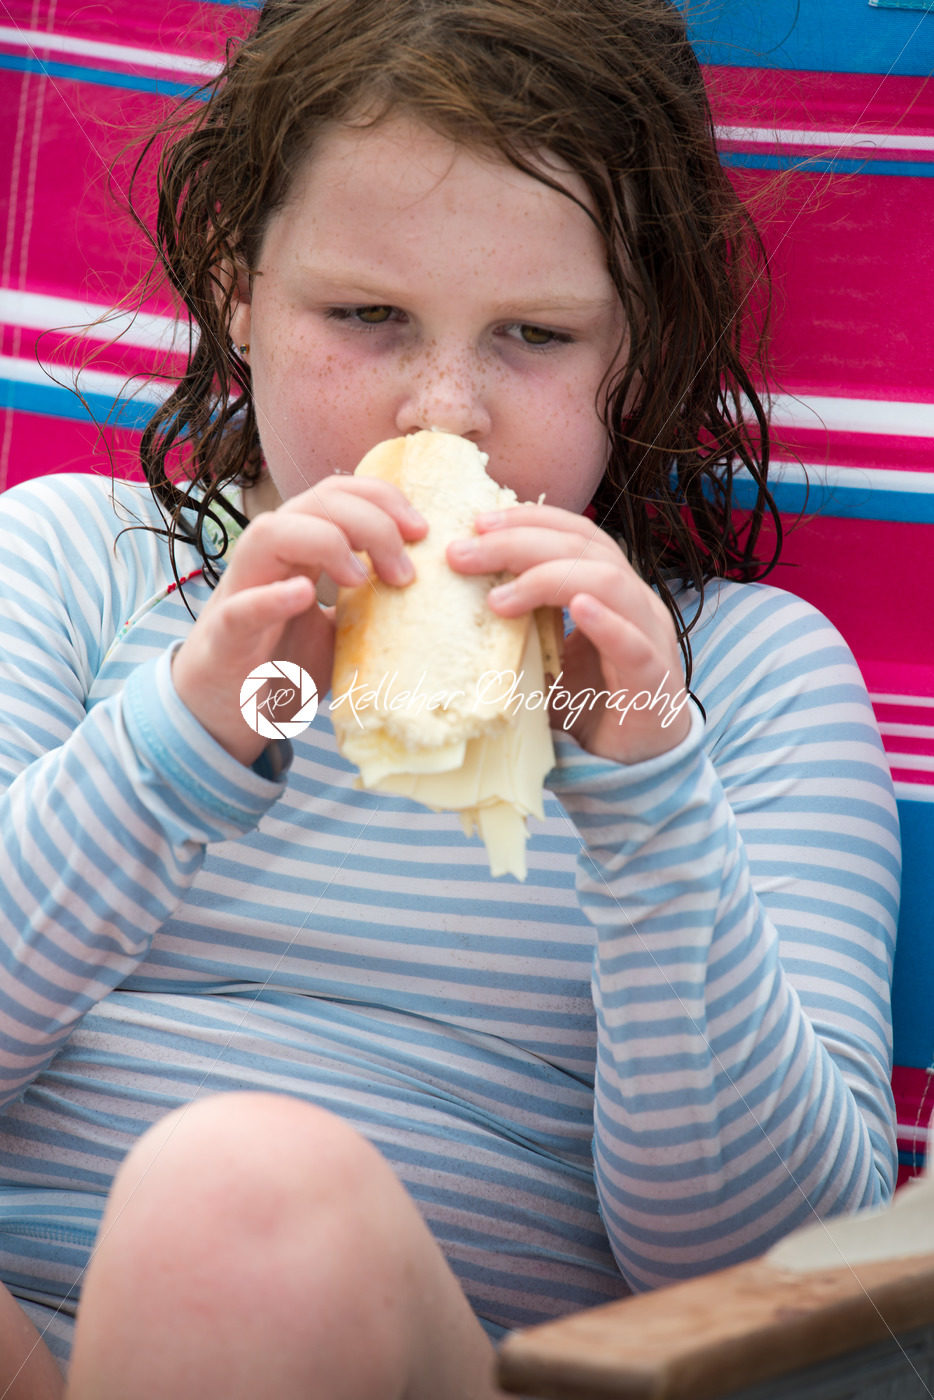 Child girl with cheese hoagie sandwhich on a deck chair by the ocean - Kelleher Photography Store